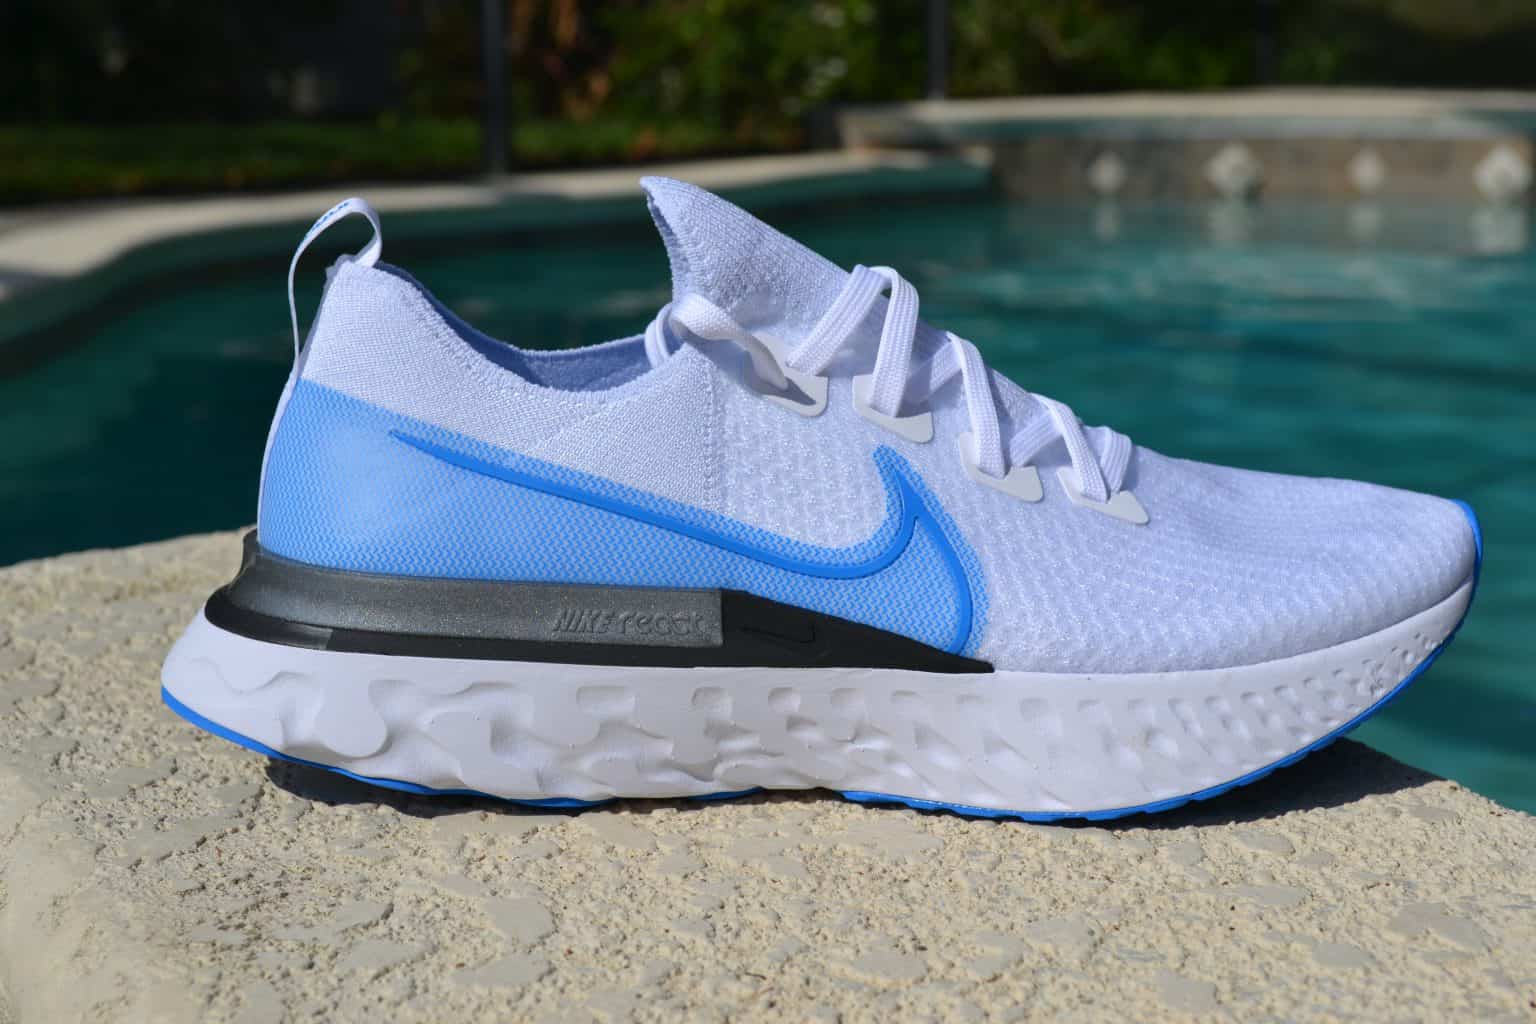 Nike React Infinity Run Flyknit - Running Shoe Review - Fit at Midlife